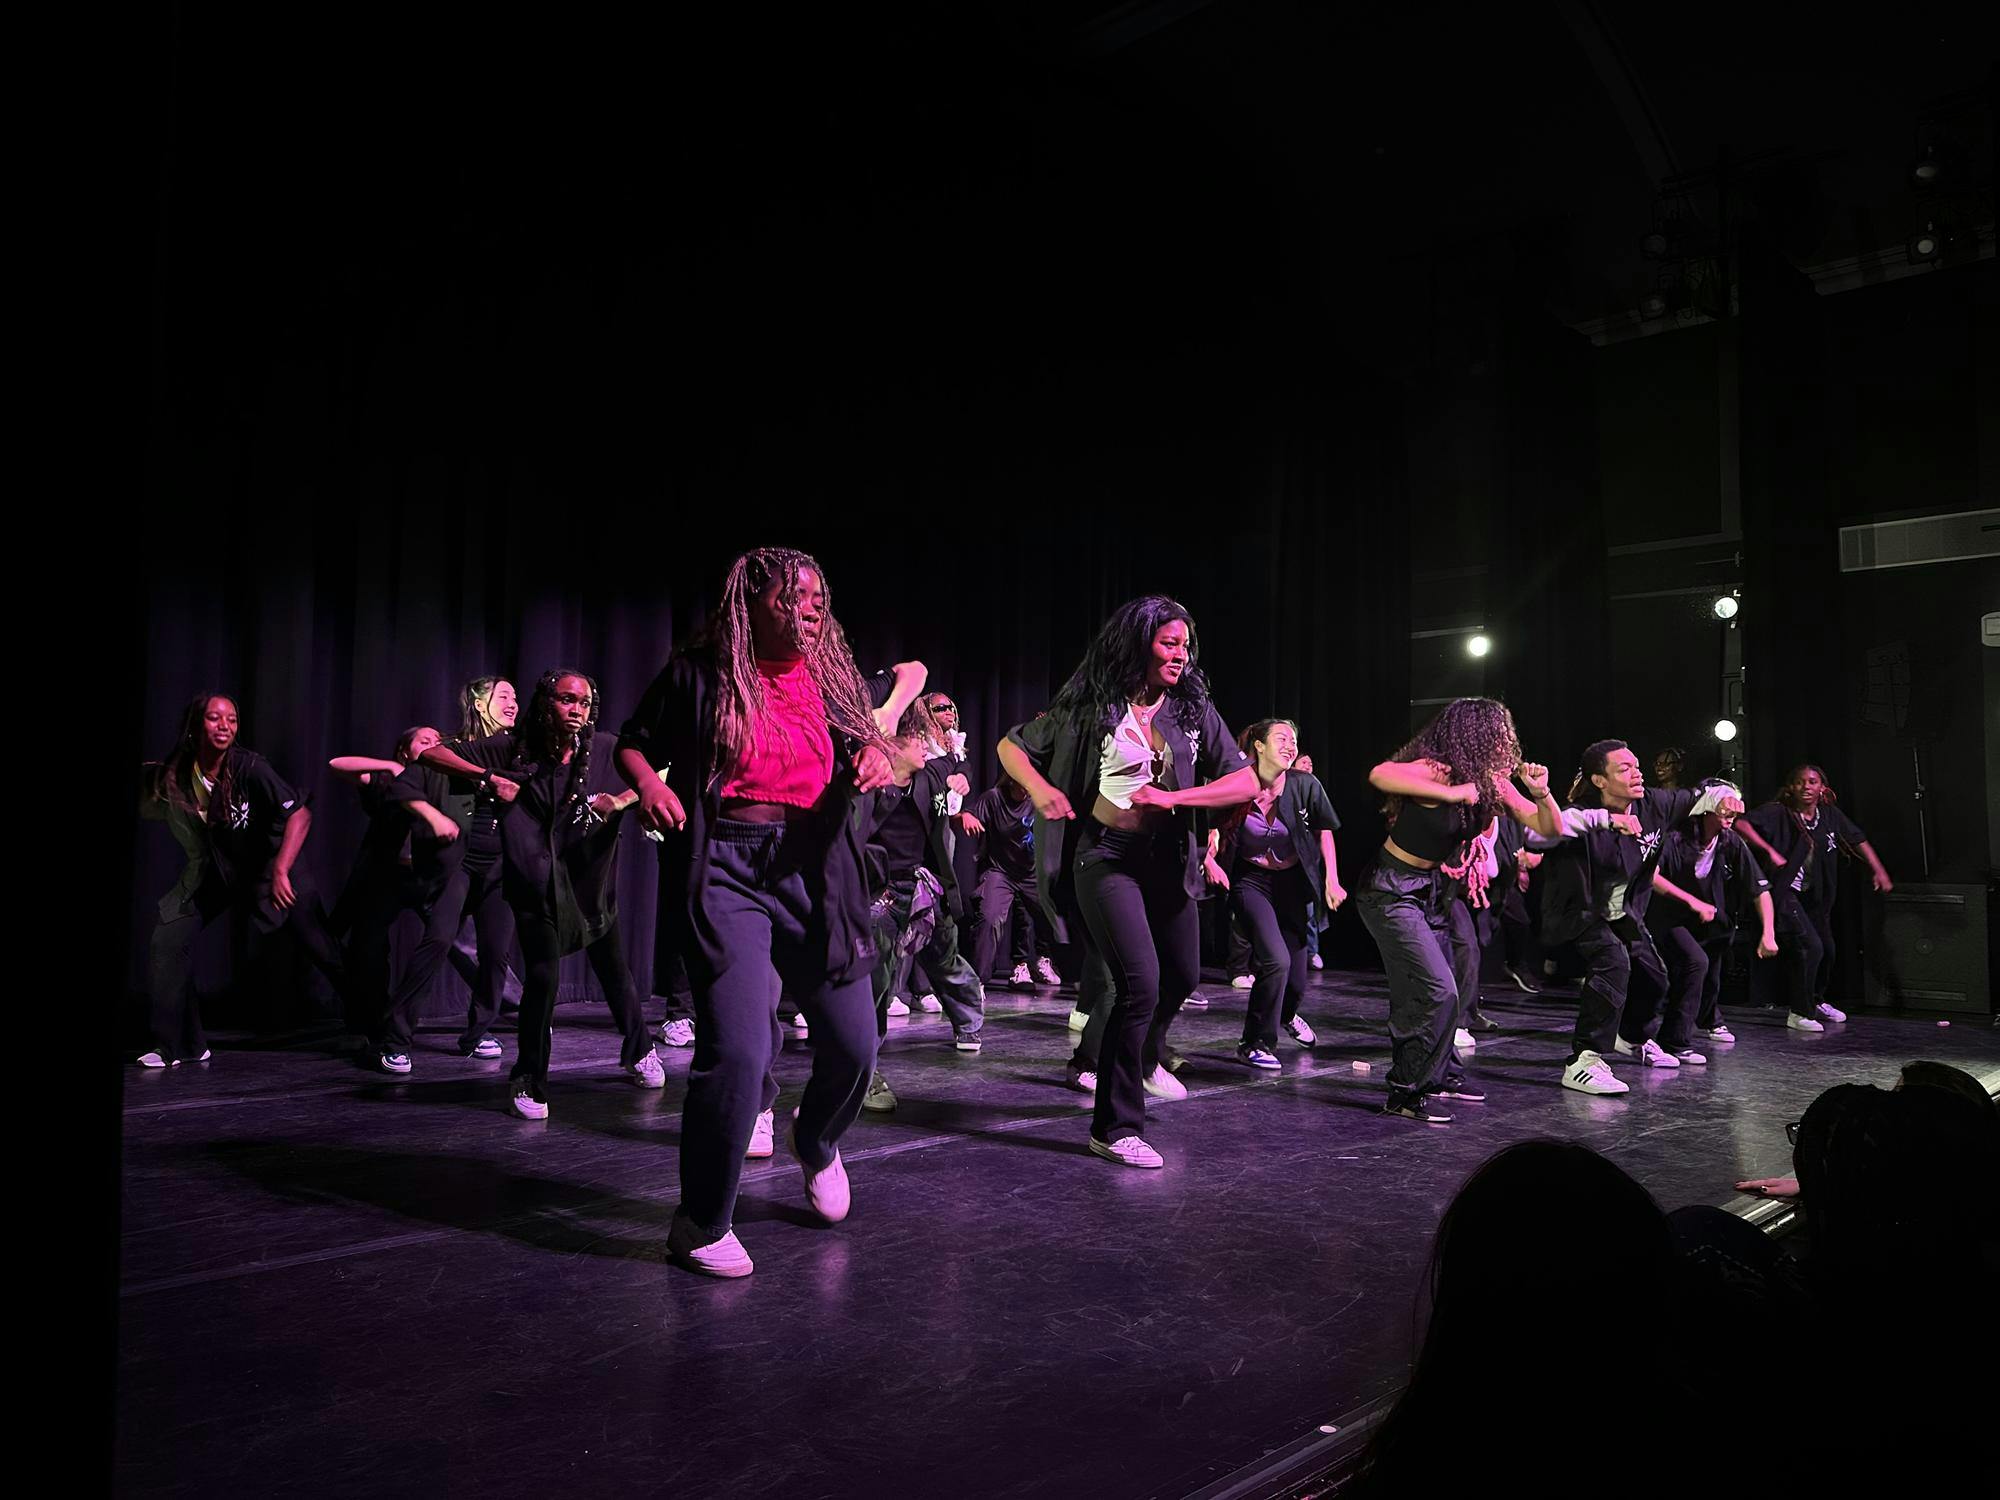 A group of dancers do a synchronized step on stage.  